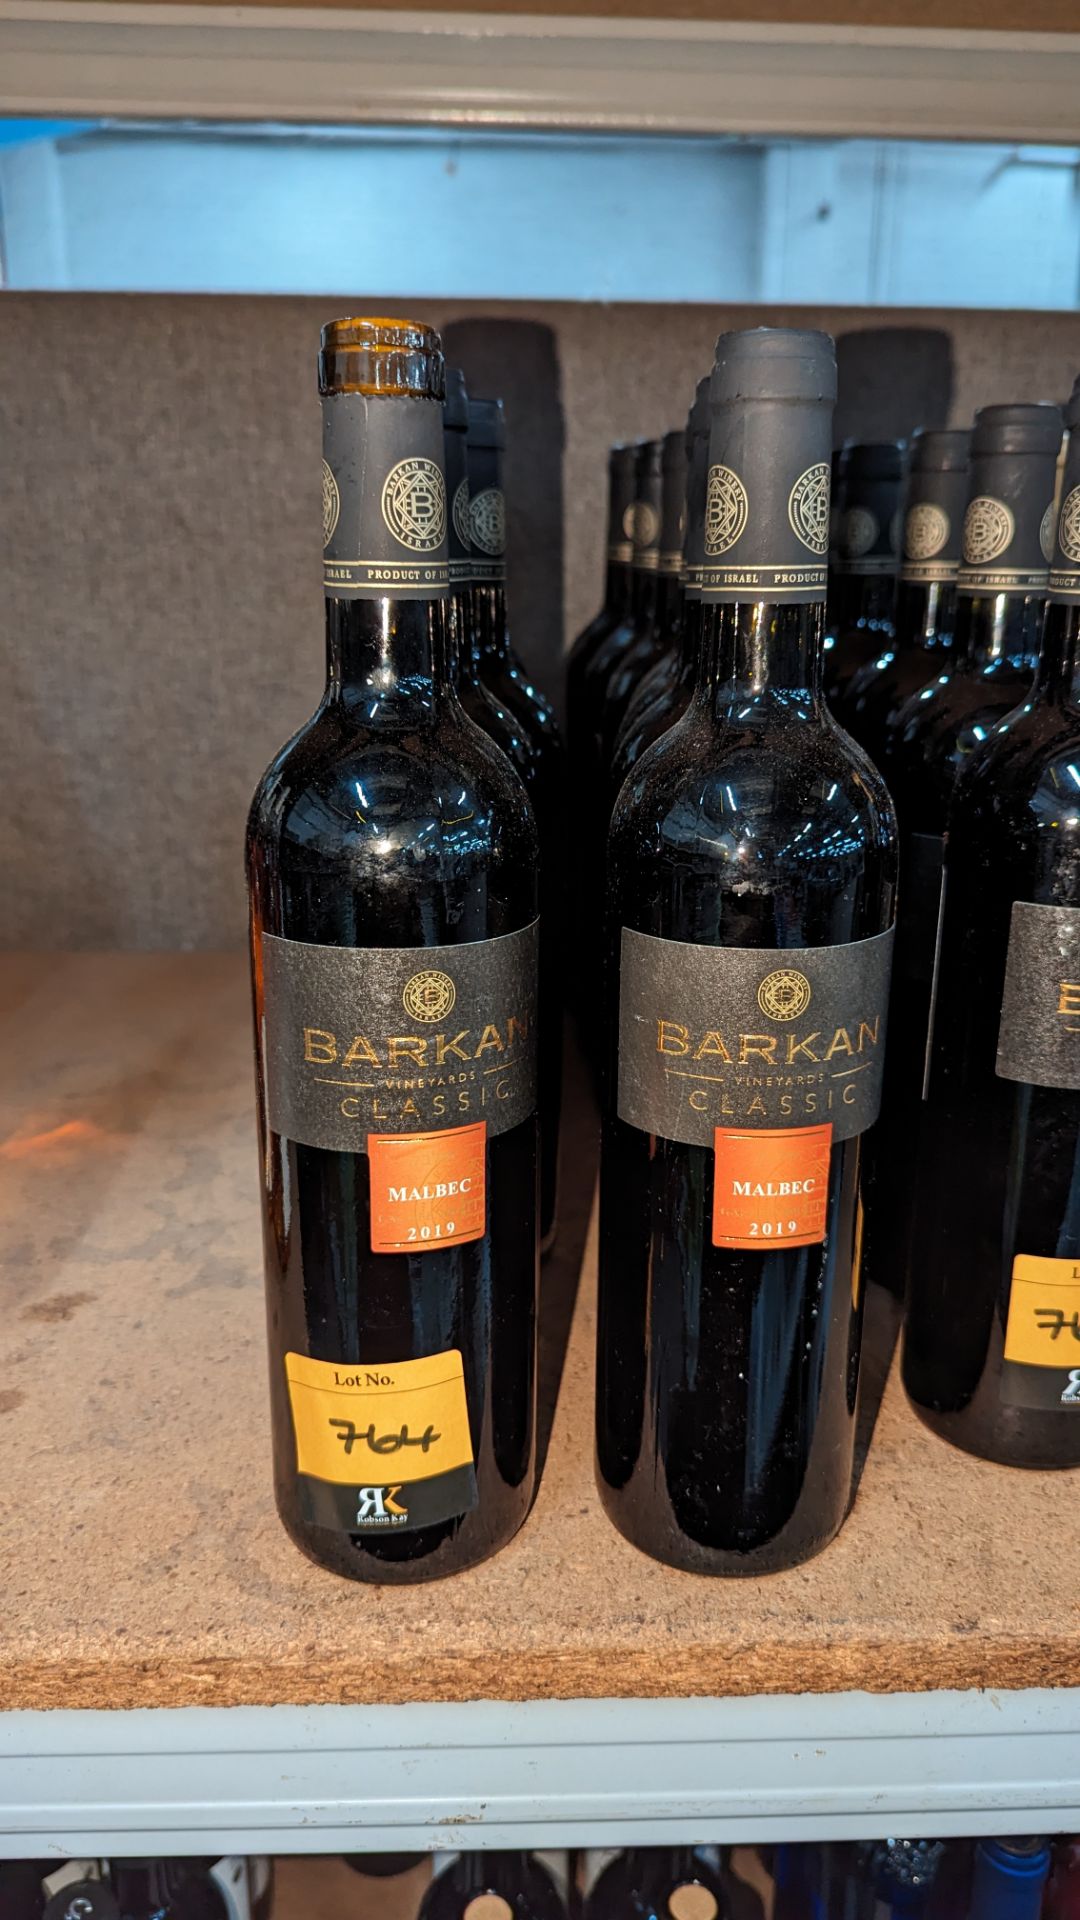 14 bottles of Barkan Vineyards Classic 2019 Malbec Israeli red wine sold under AWRS number XQAW00000